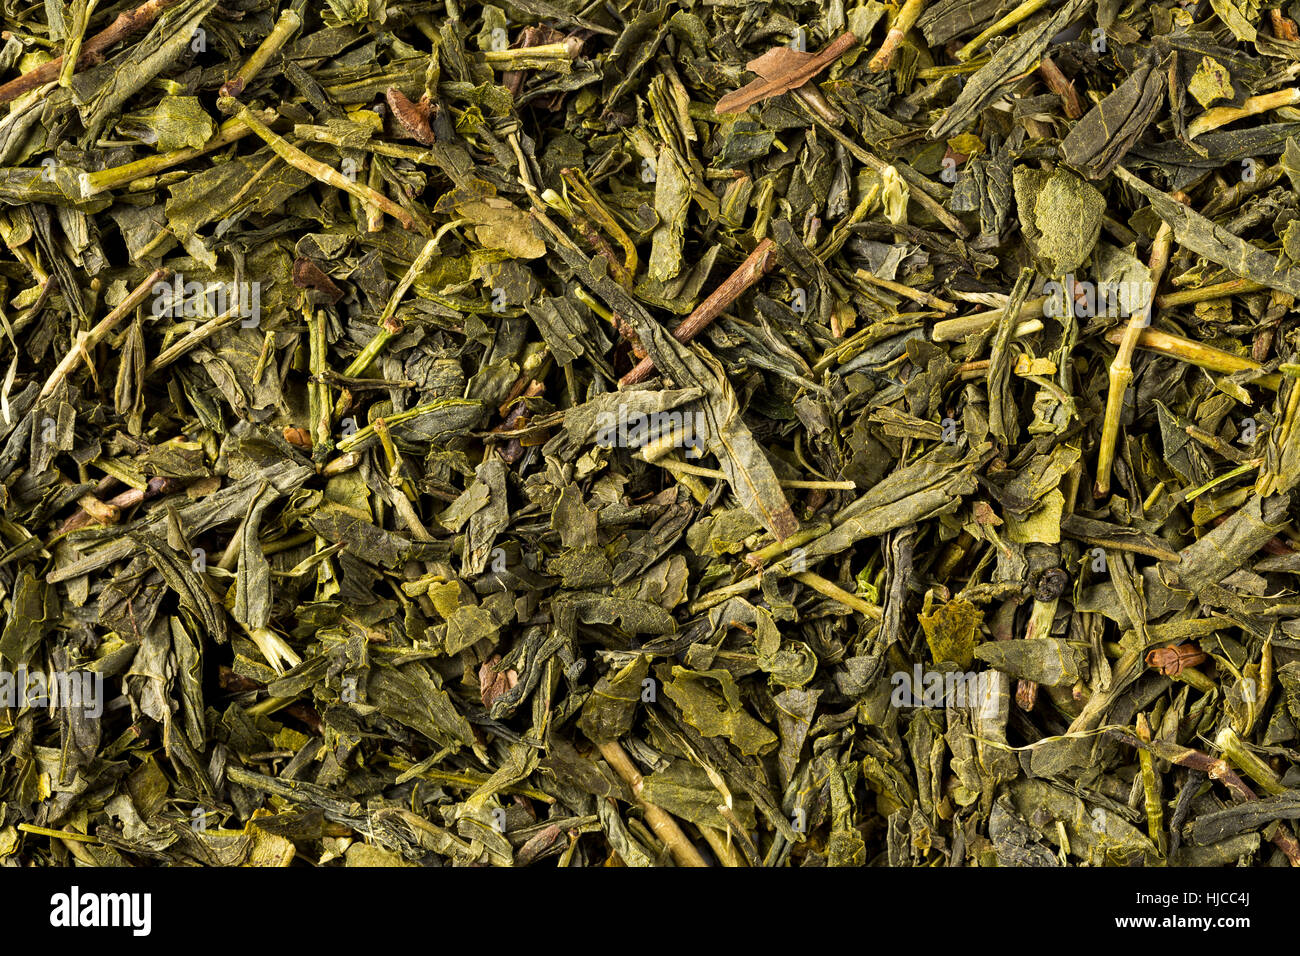 Dried leaves of green japanese bancha tea, full frame, image background. Stock Photo